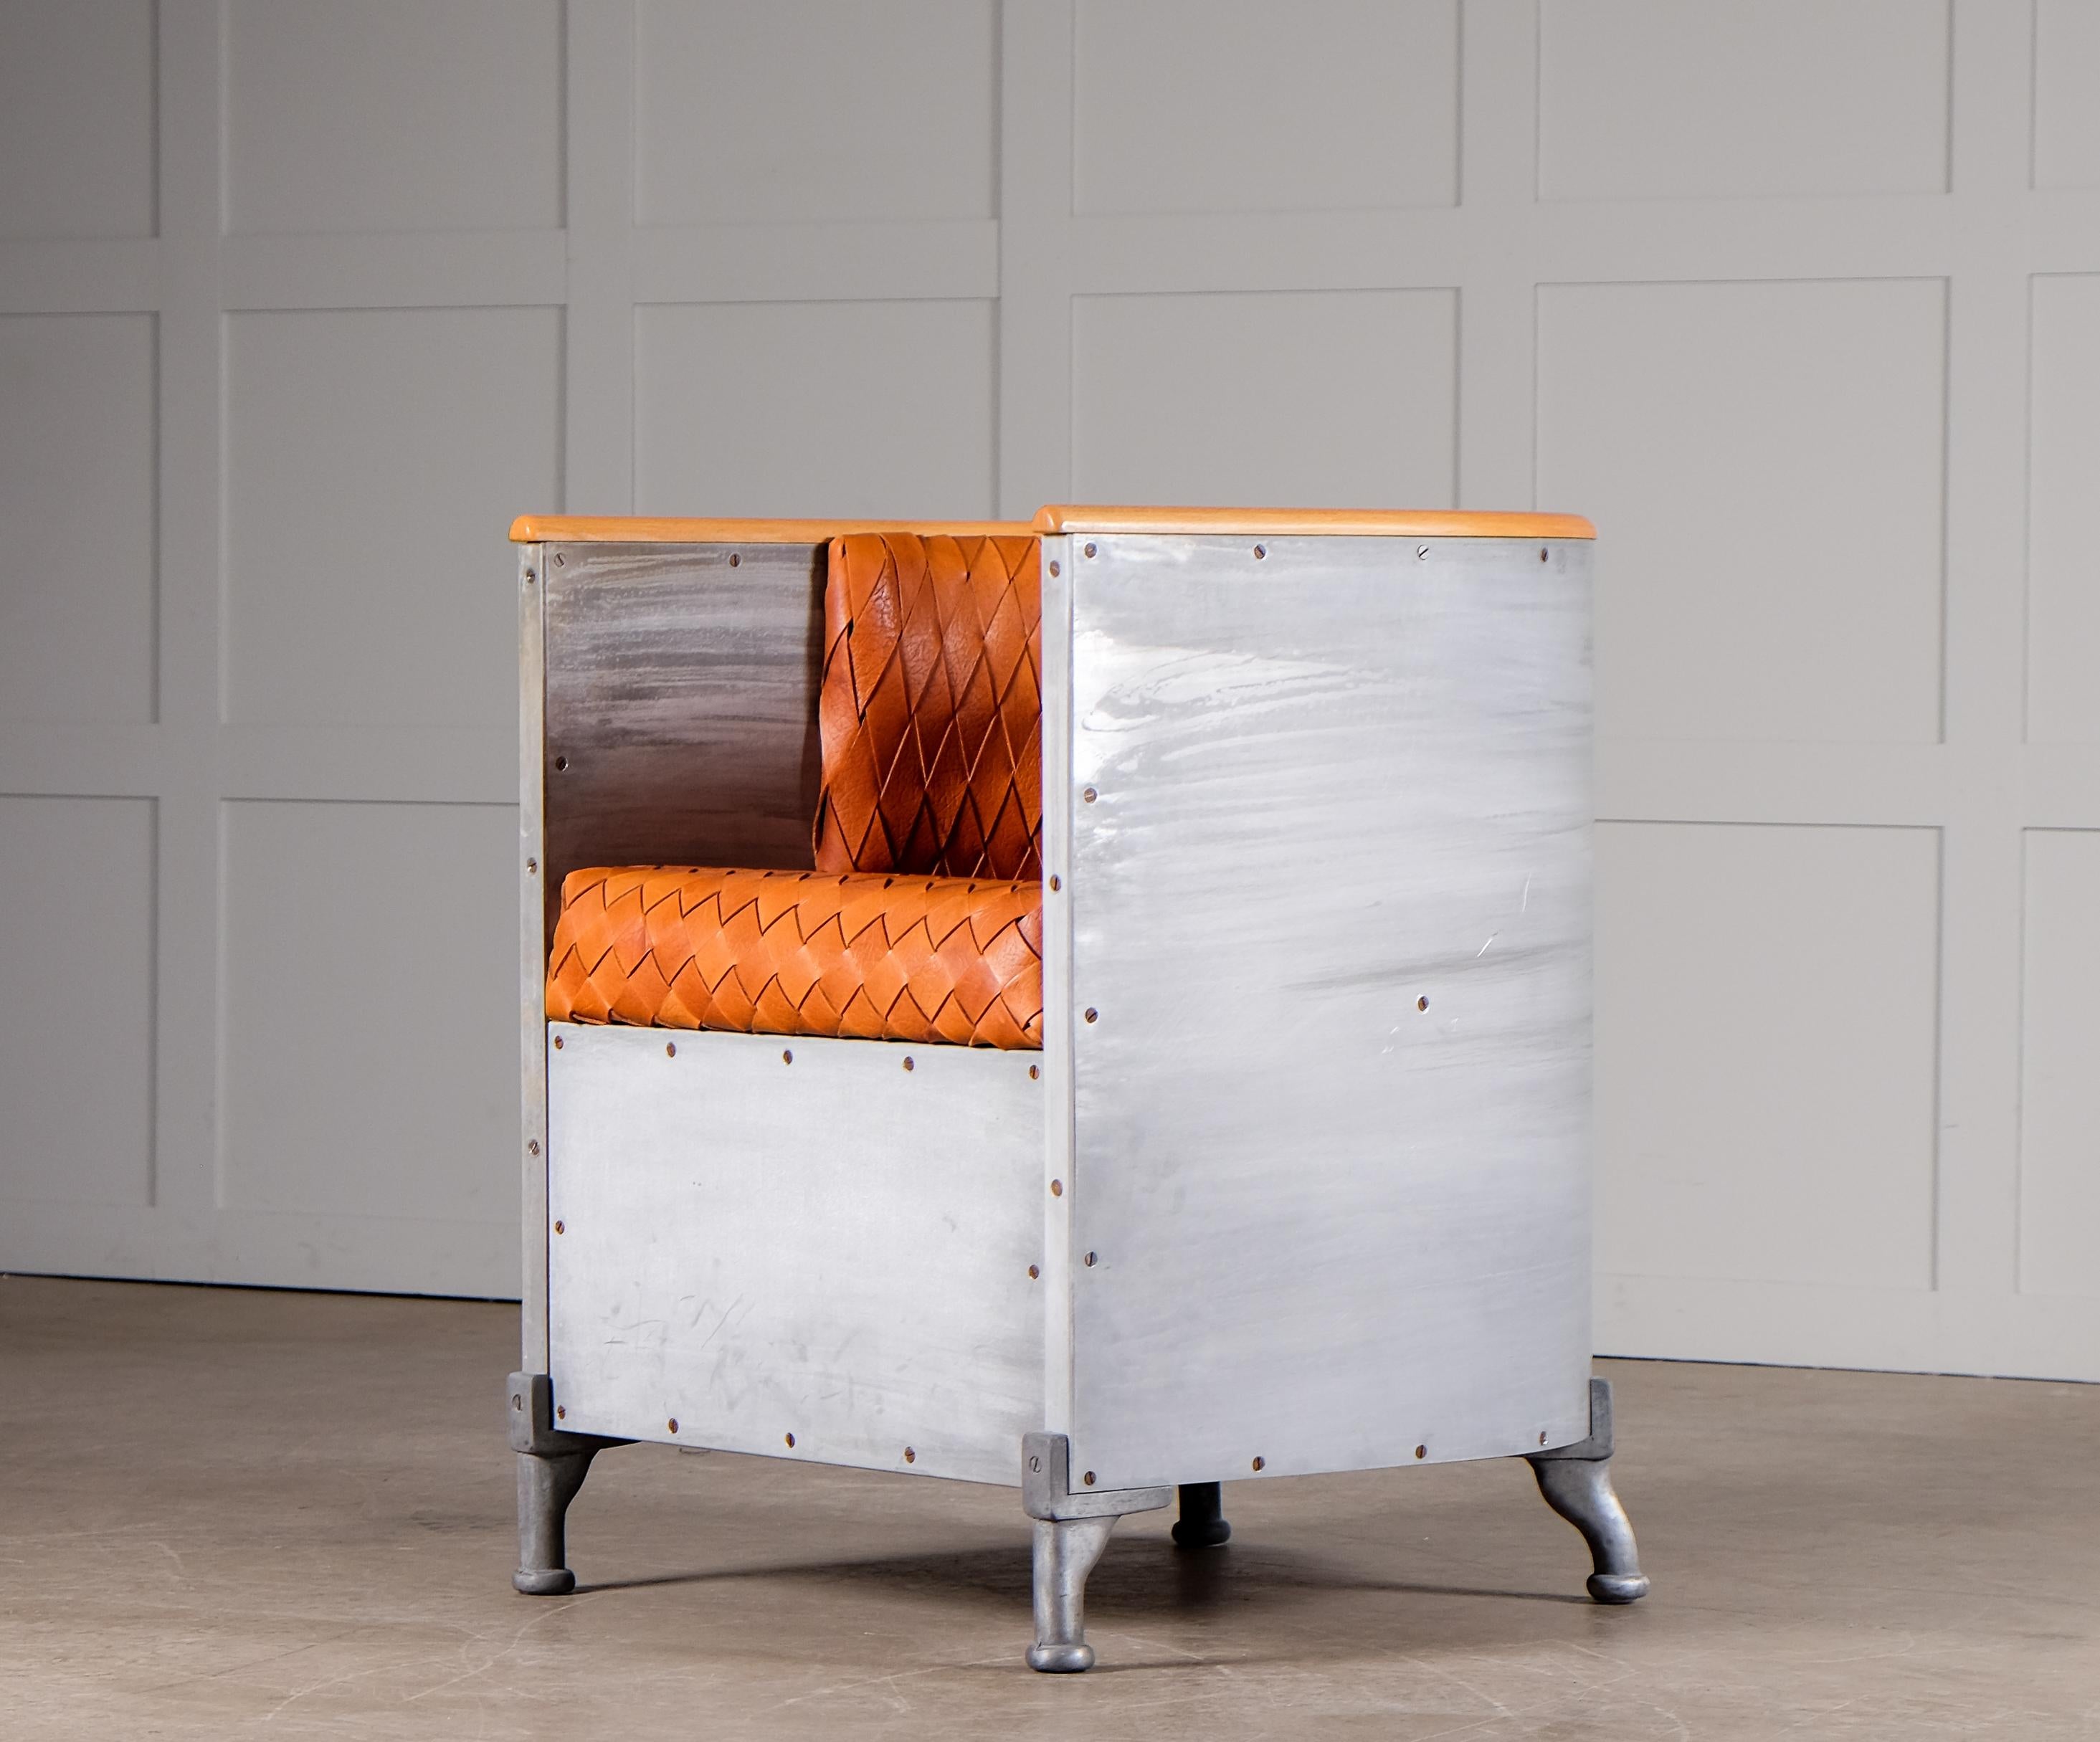 Mats Theselius 'Aluminium Chair' Edition 163/200 by Källemo, 1990s For Sale 1